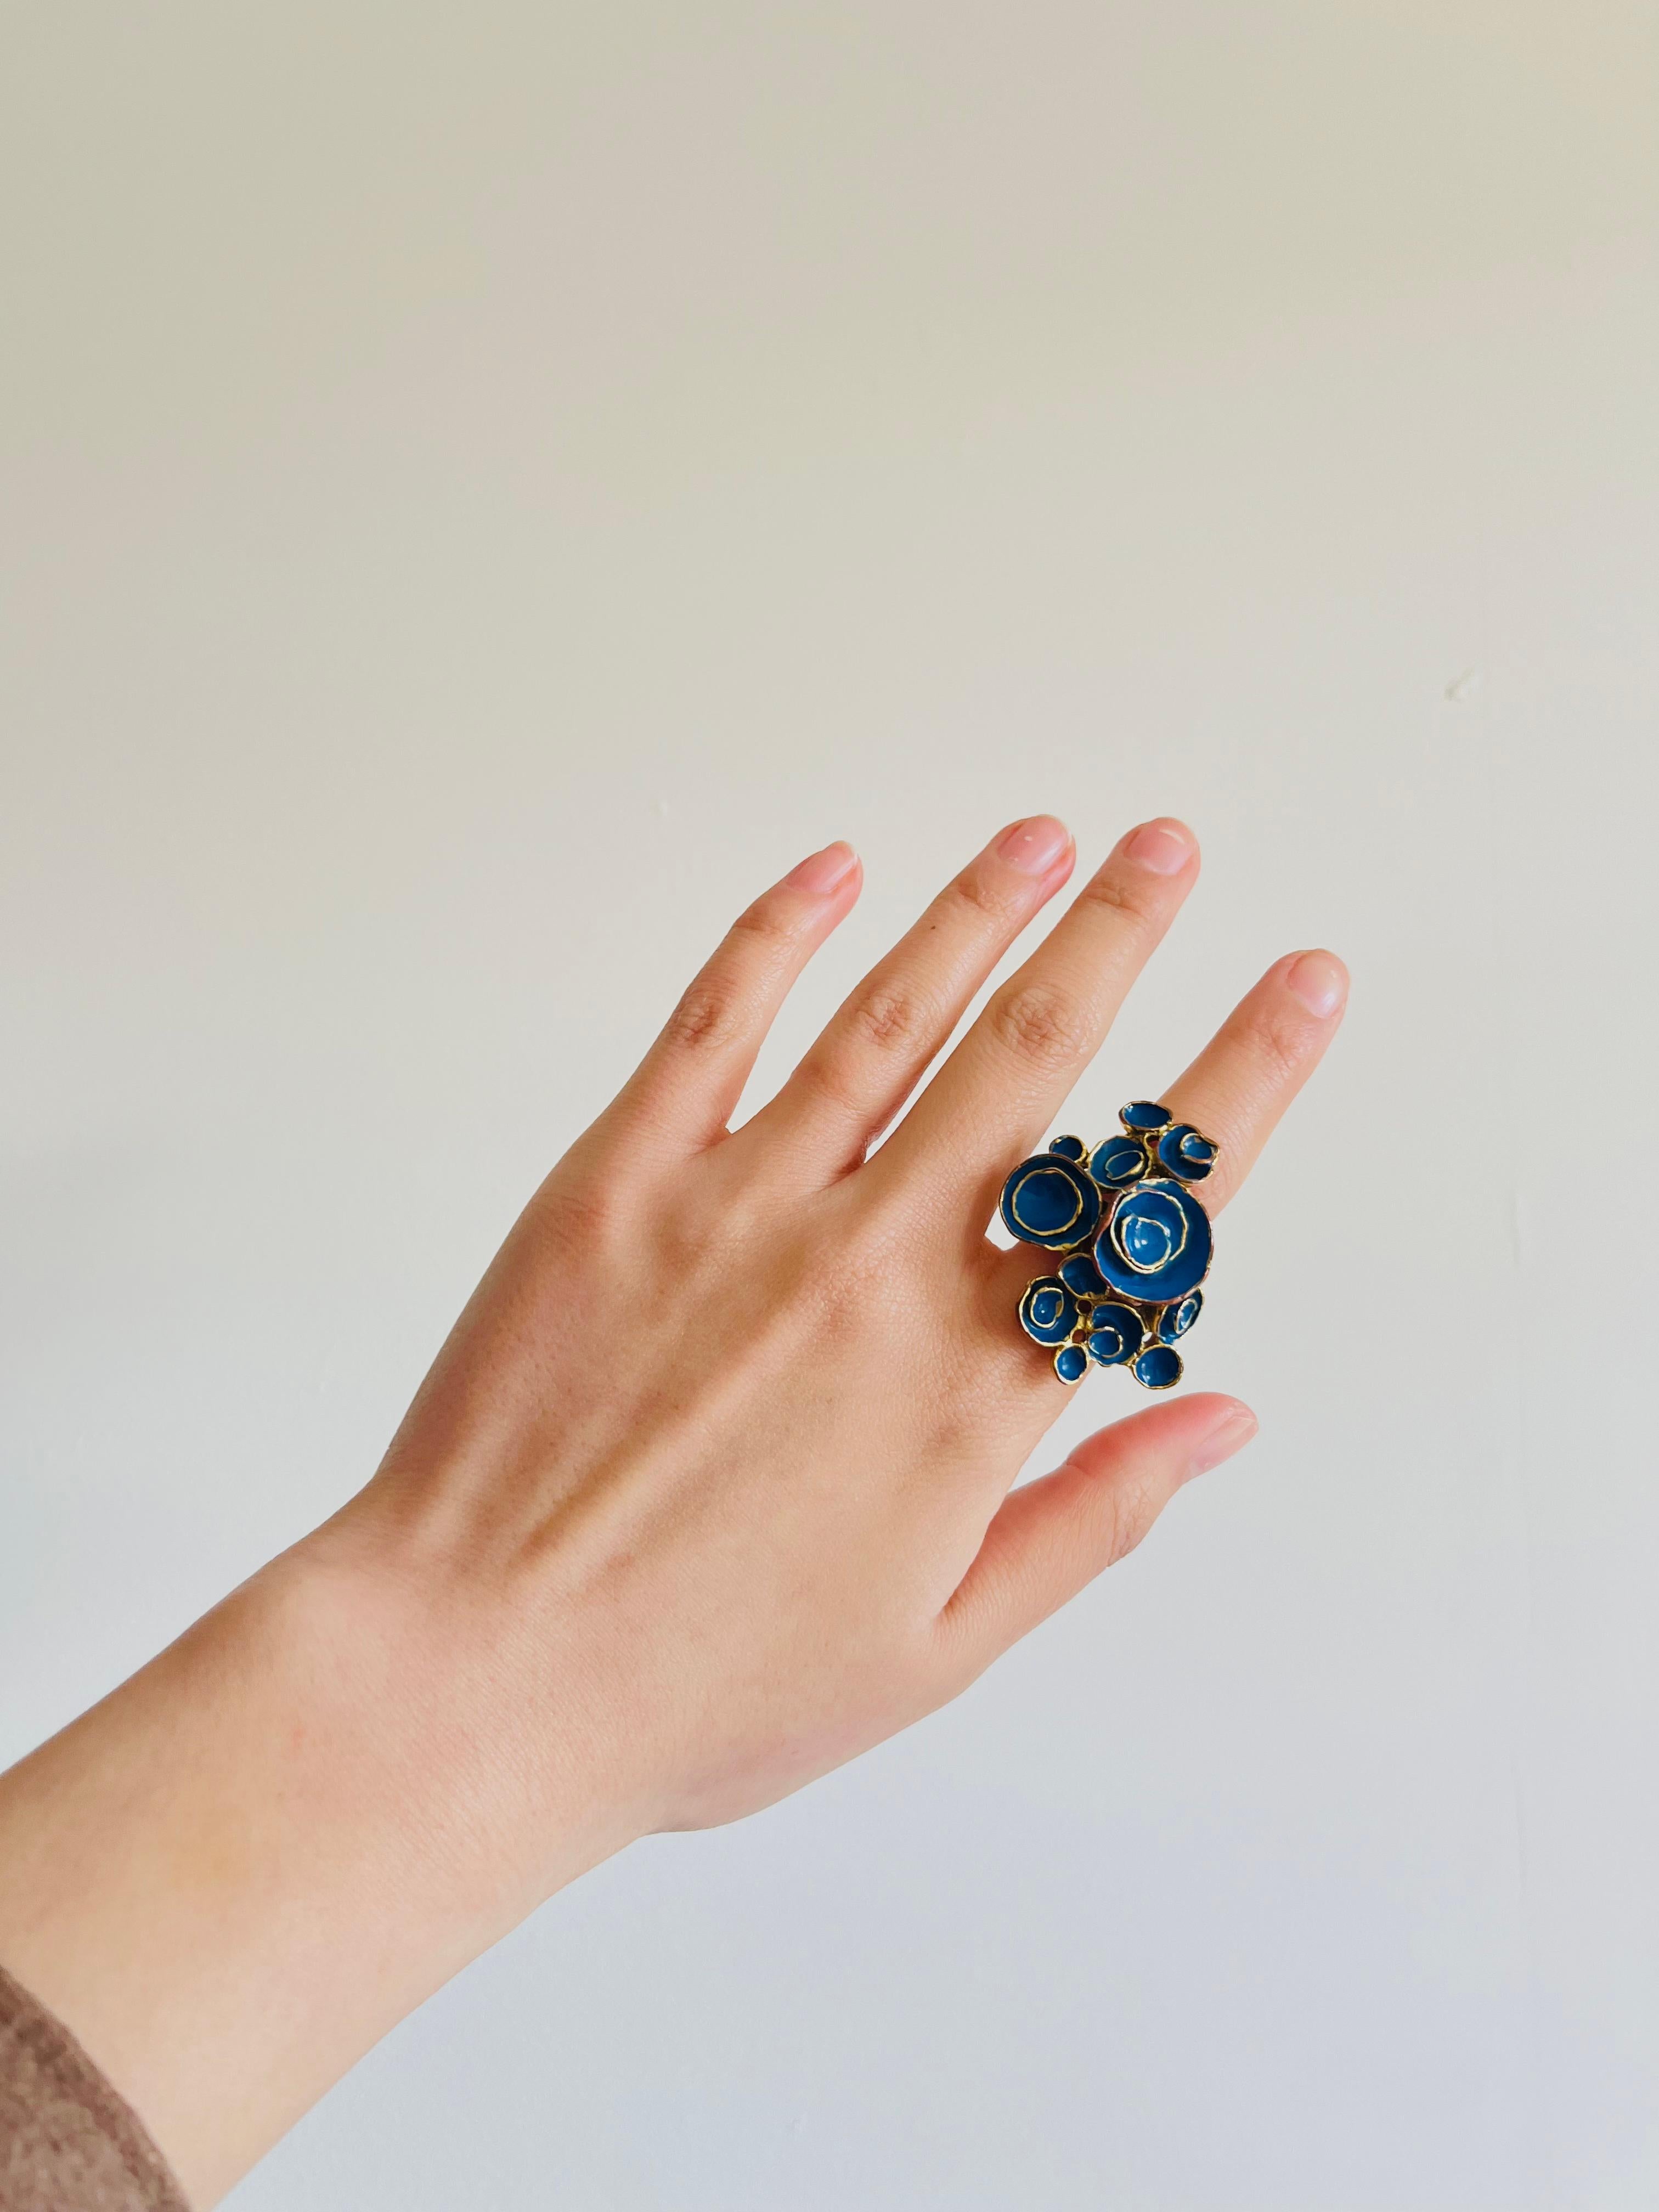 Yves Saint Laurent YSL Arty Navy Cluster Flowers Statement Chunky Ring, Size 6 In Good Condition For Sale In Wokingham, England